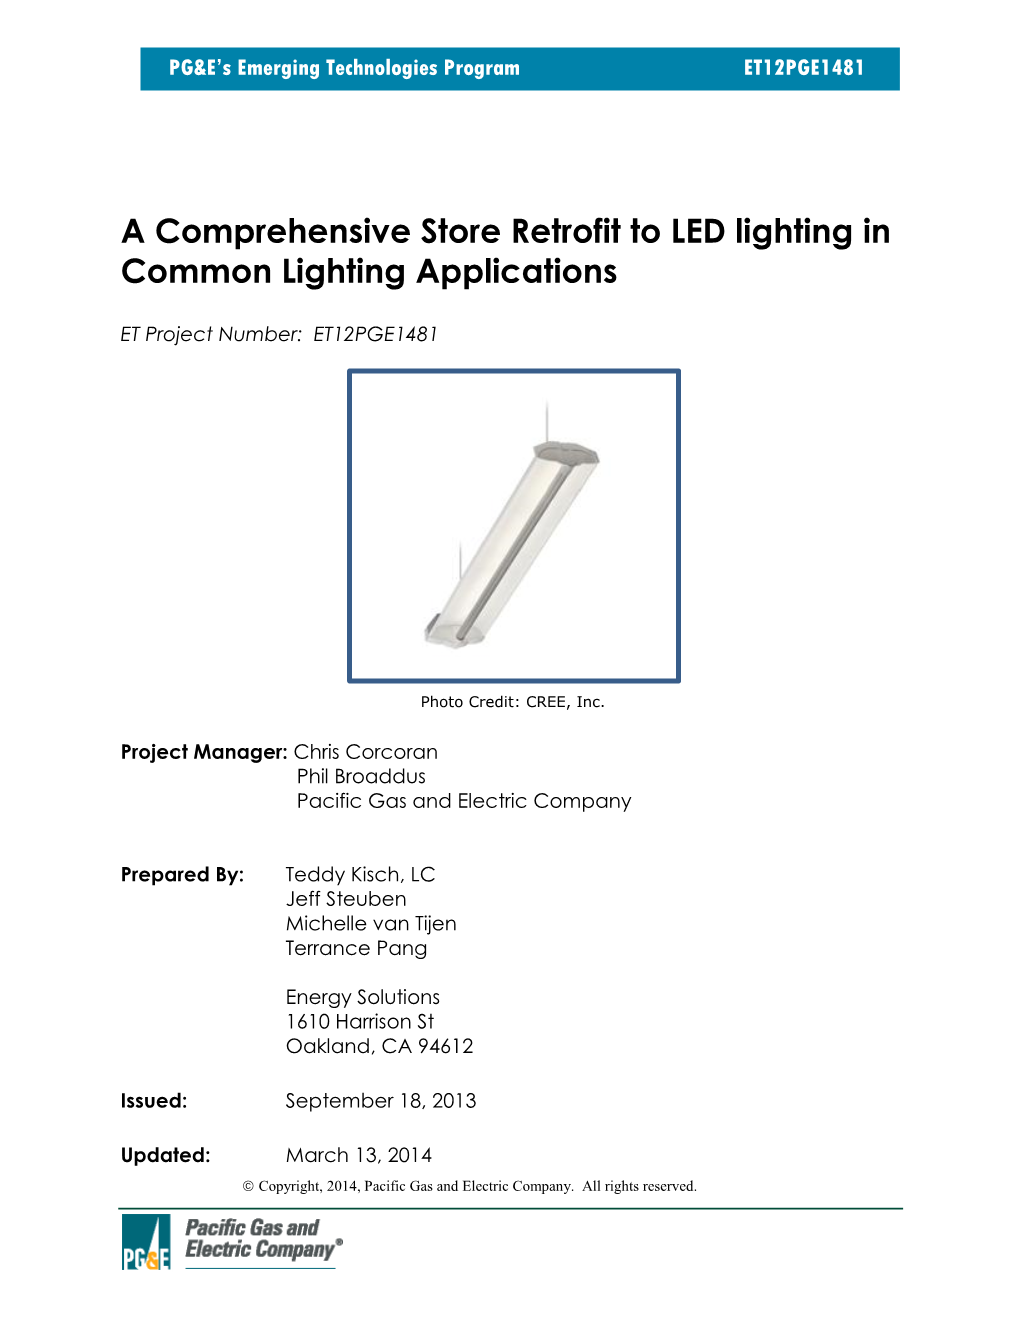 A Comprehensive Store Retrofit to LED Lighting in Common Lighting Applications